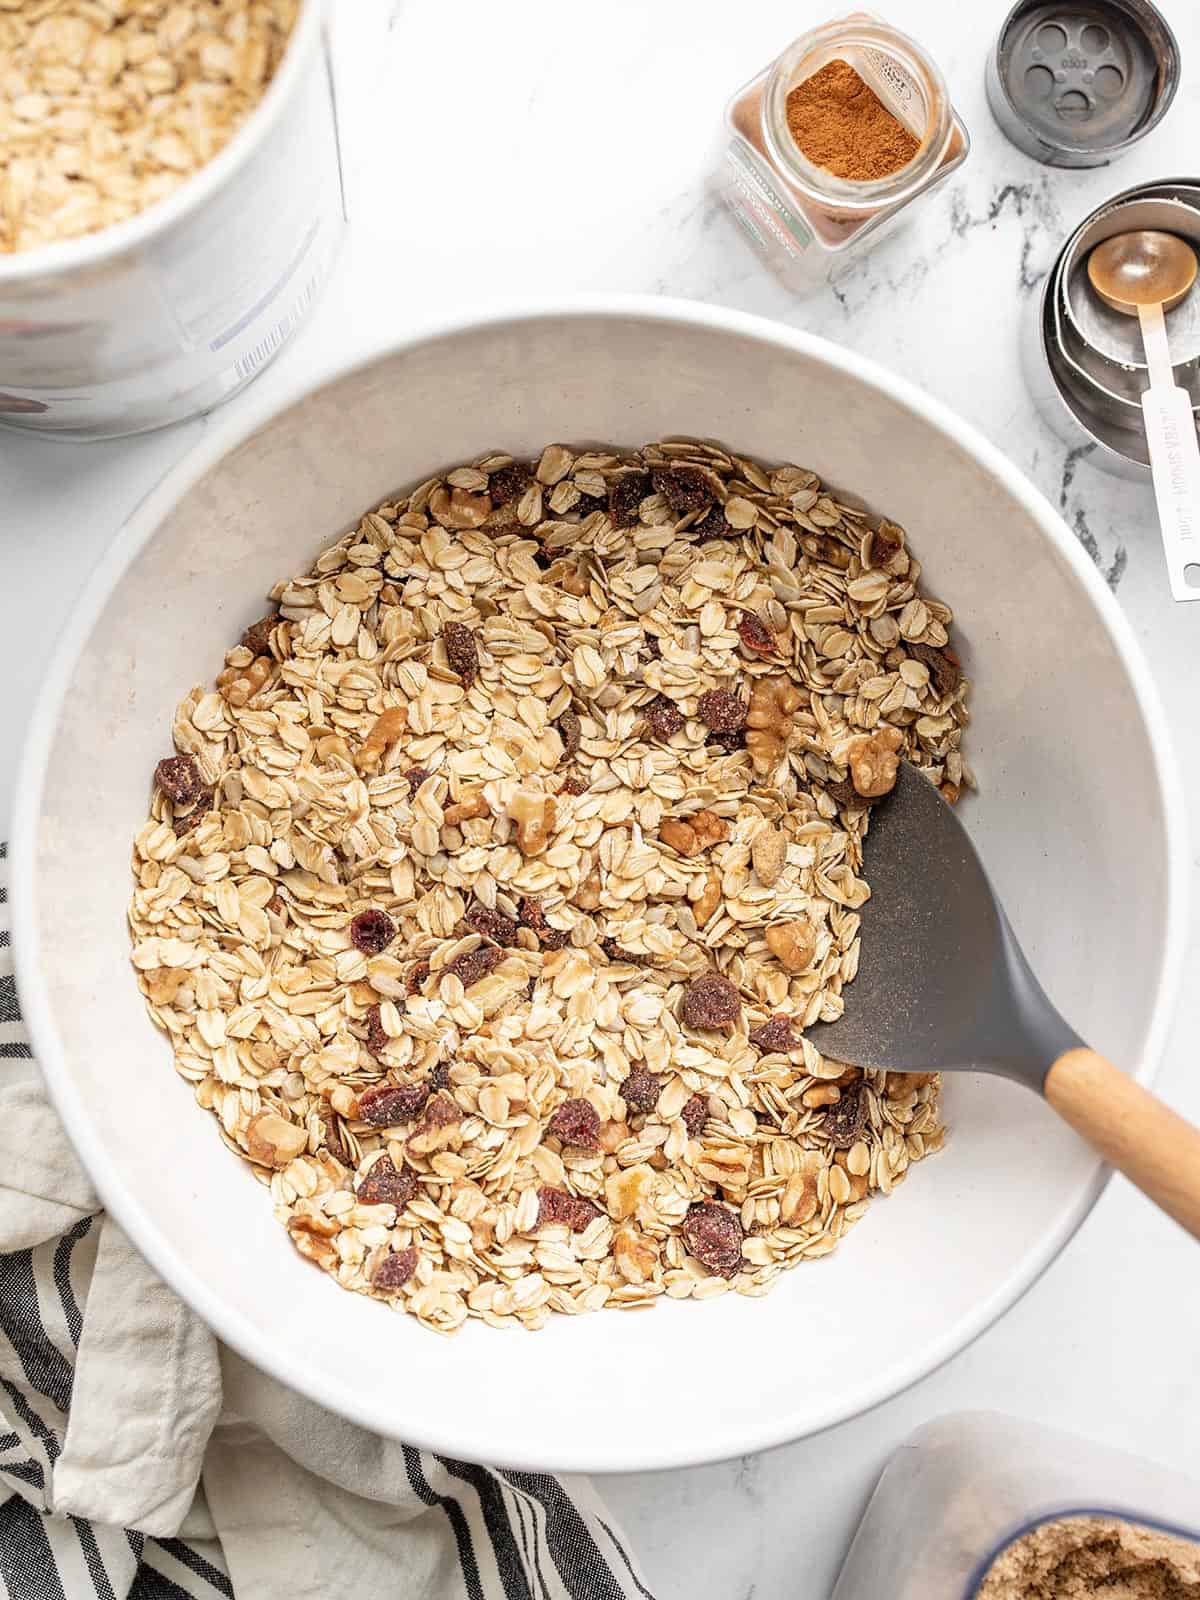 Old Fashioned Oats, Quick Oats, Oat Beverage, Snacks